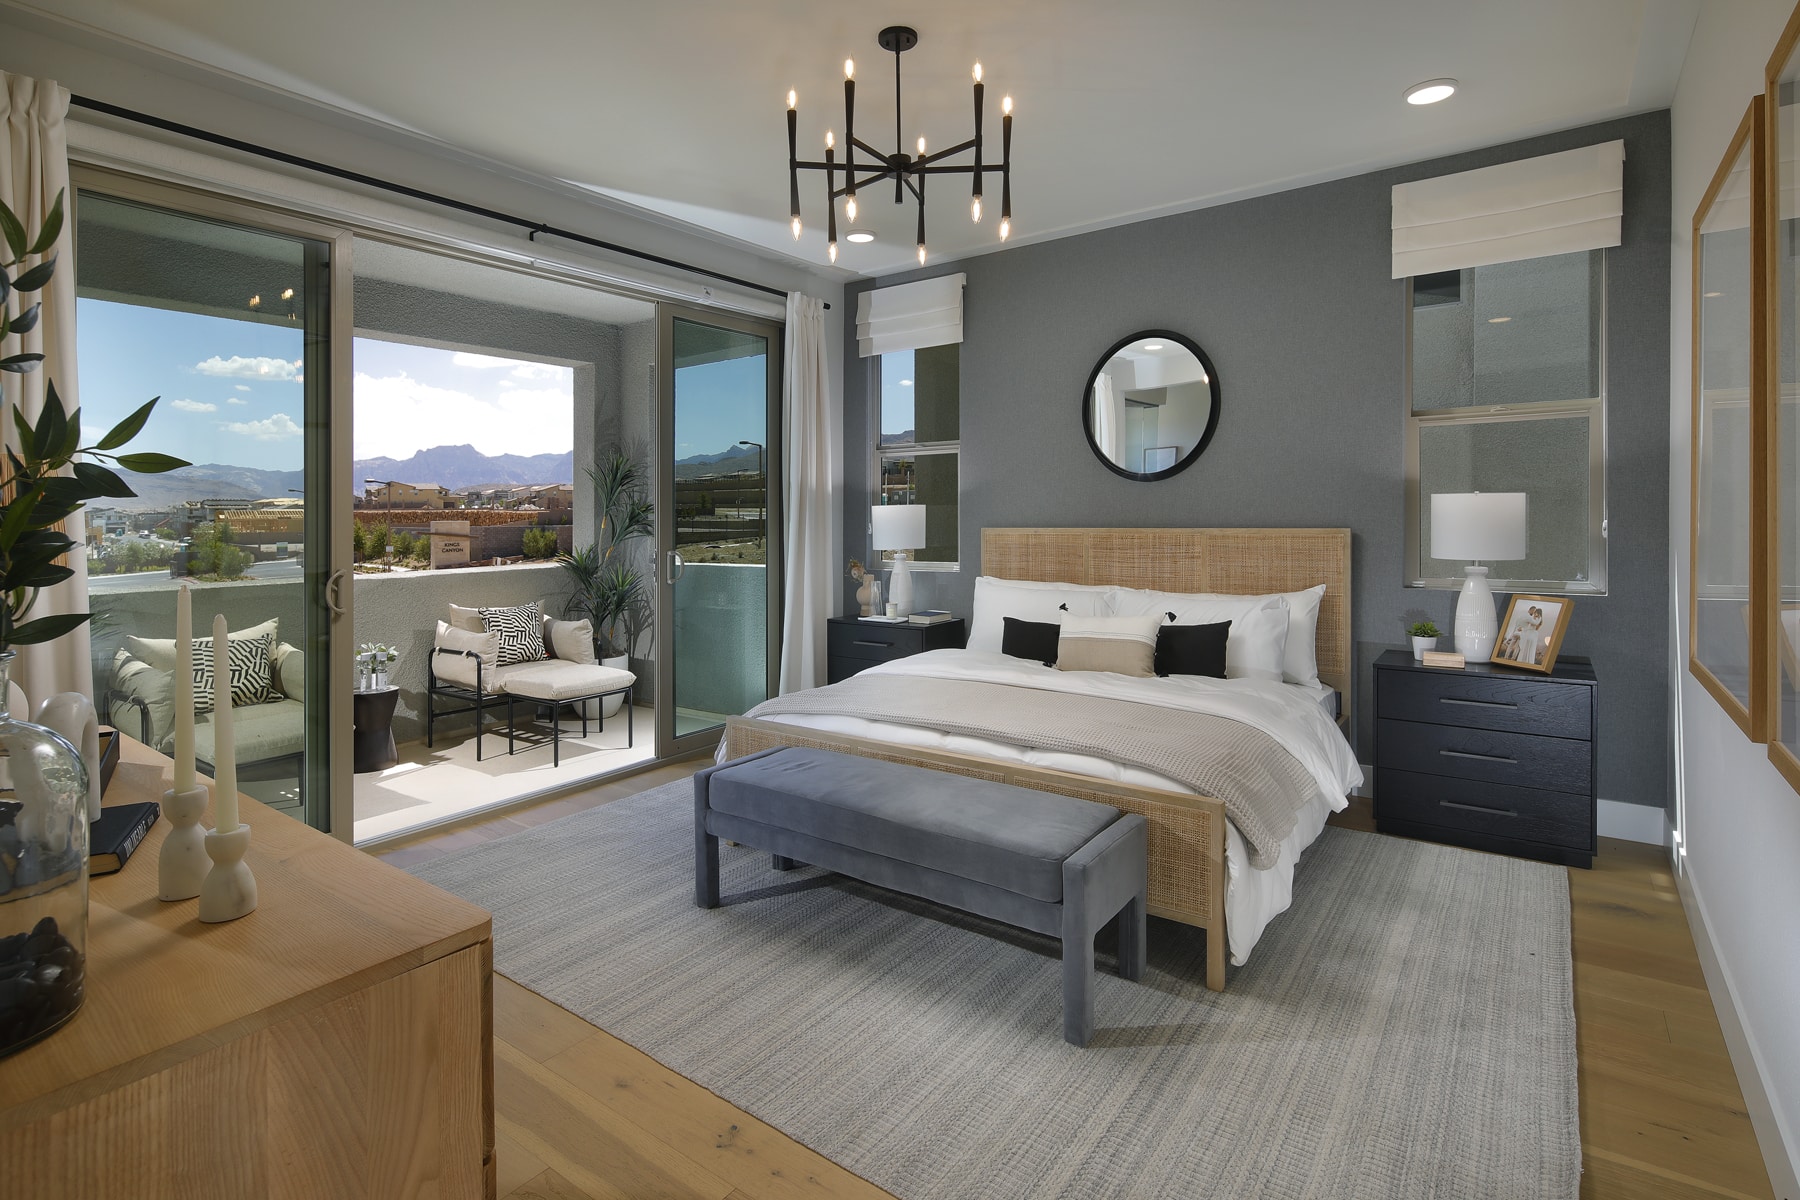 Primary Bedroom of Plan 3 at Arroyos Edge by Tri Pointe Homes